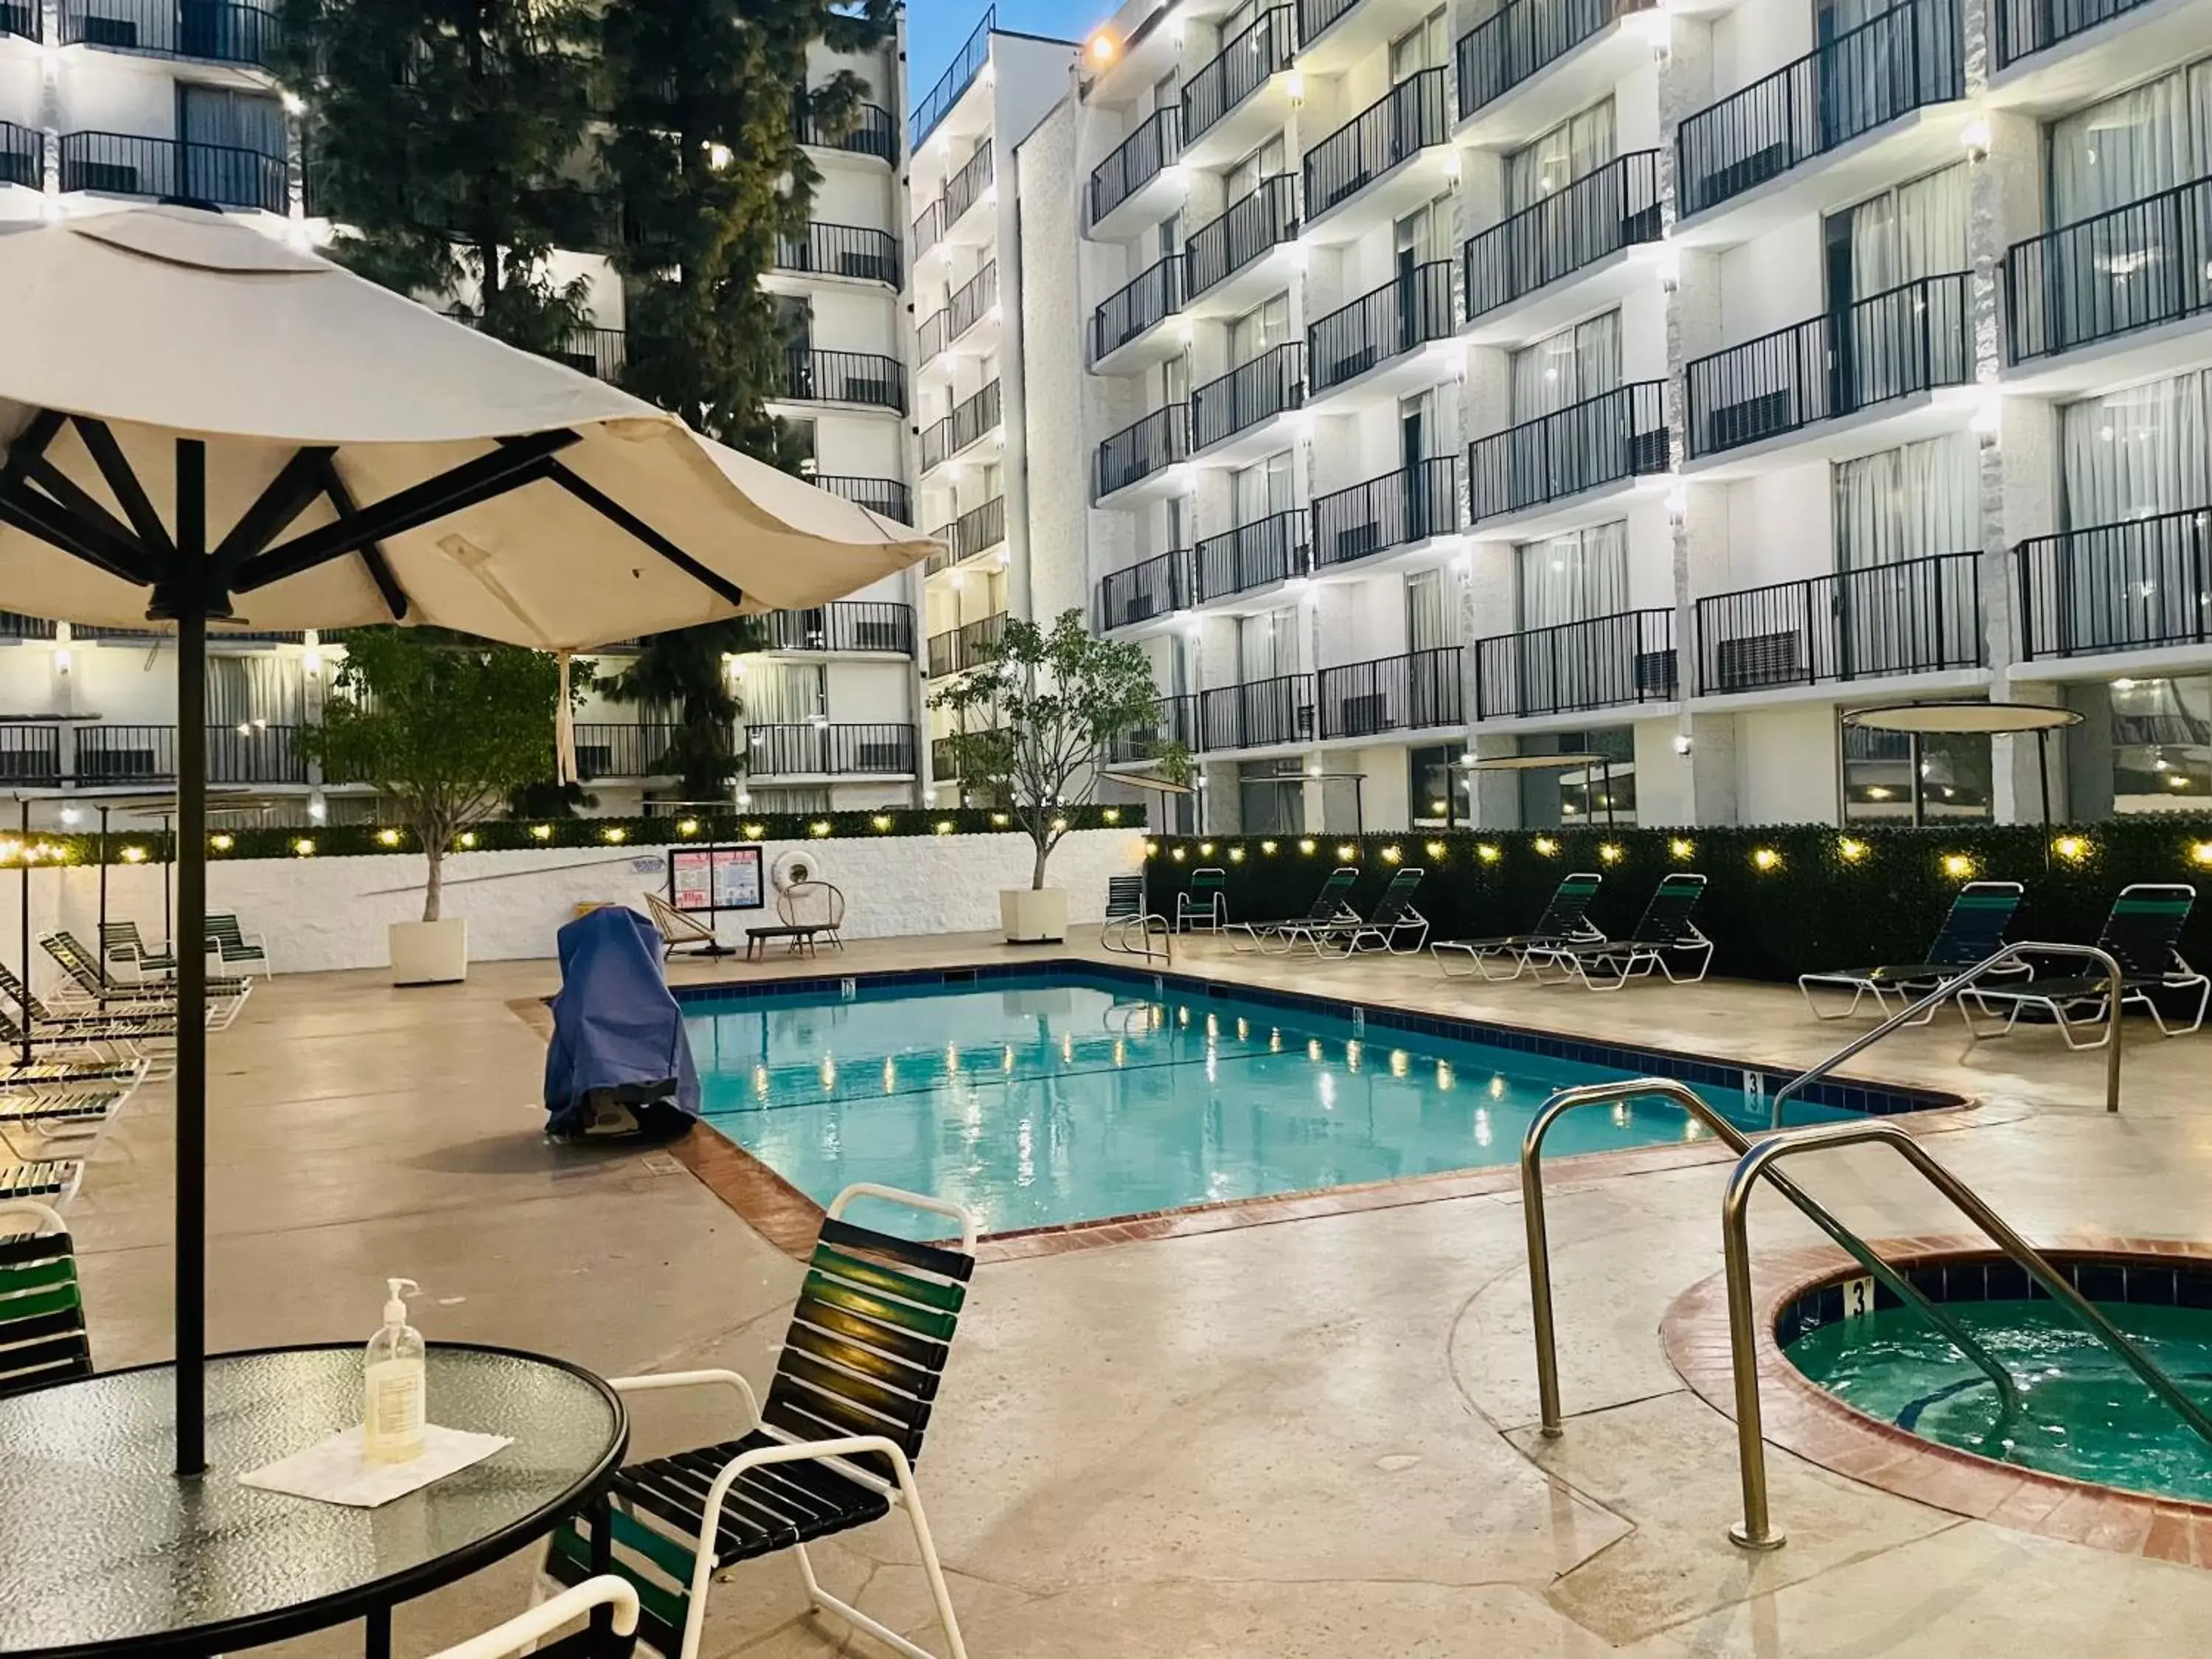 Swimming Pool in Glendale Express Hotel Los Angeles